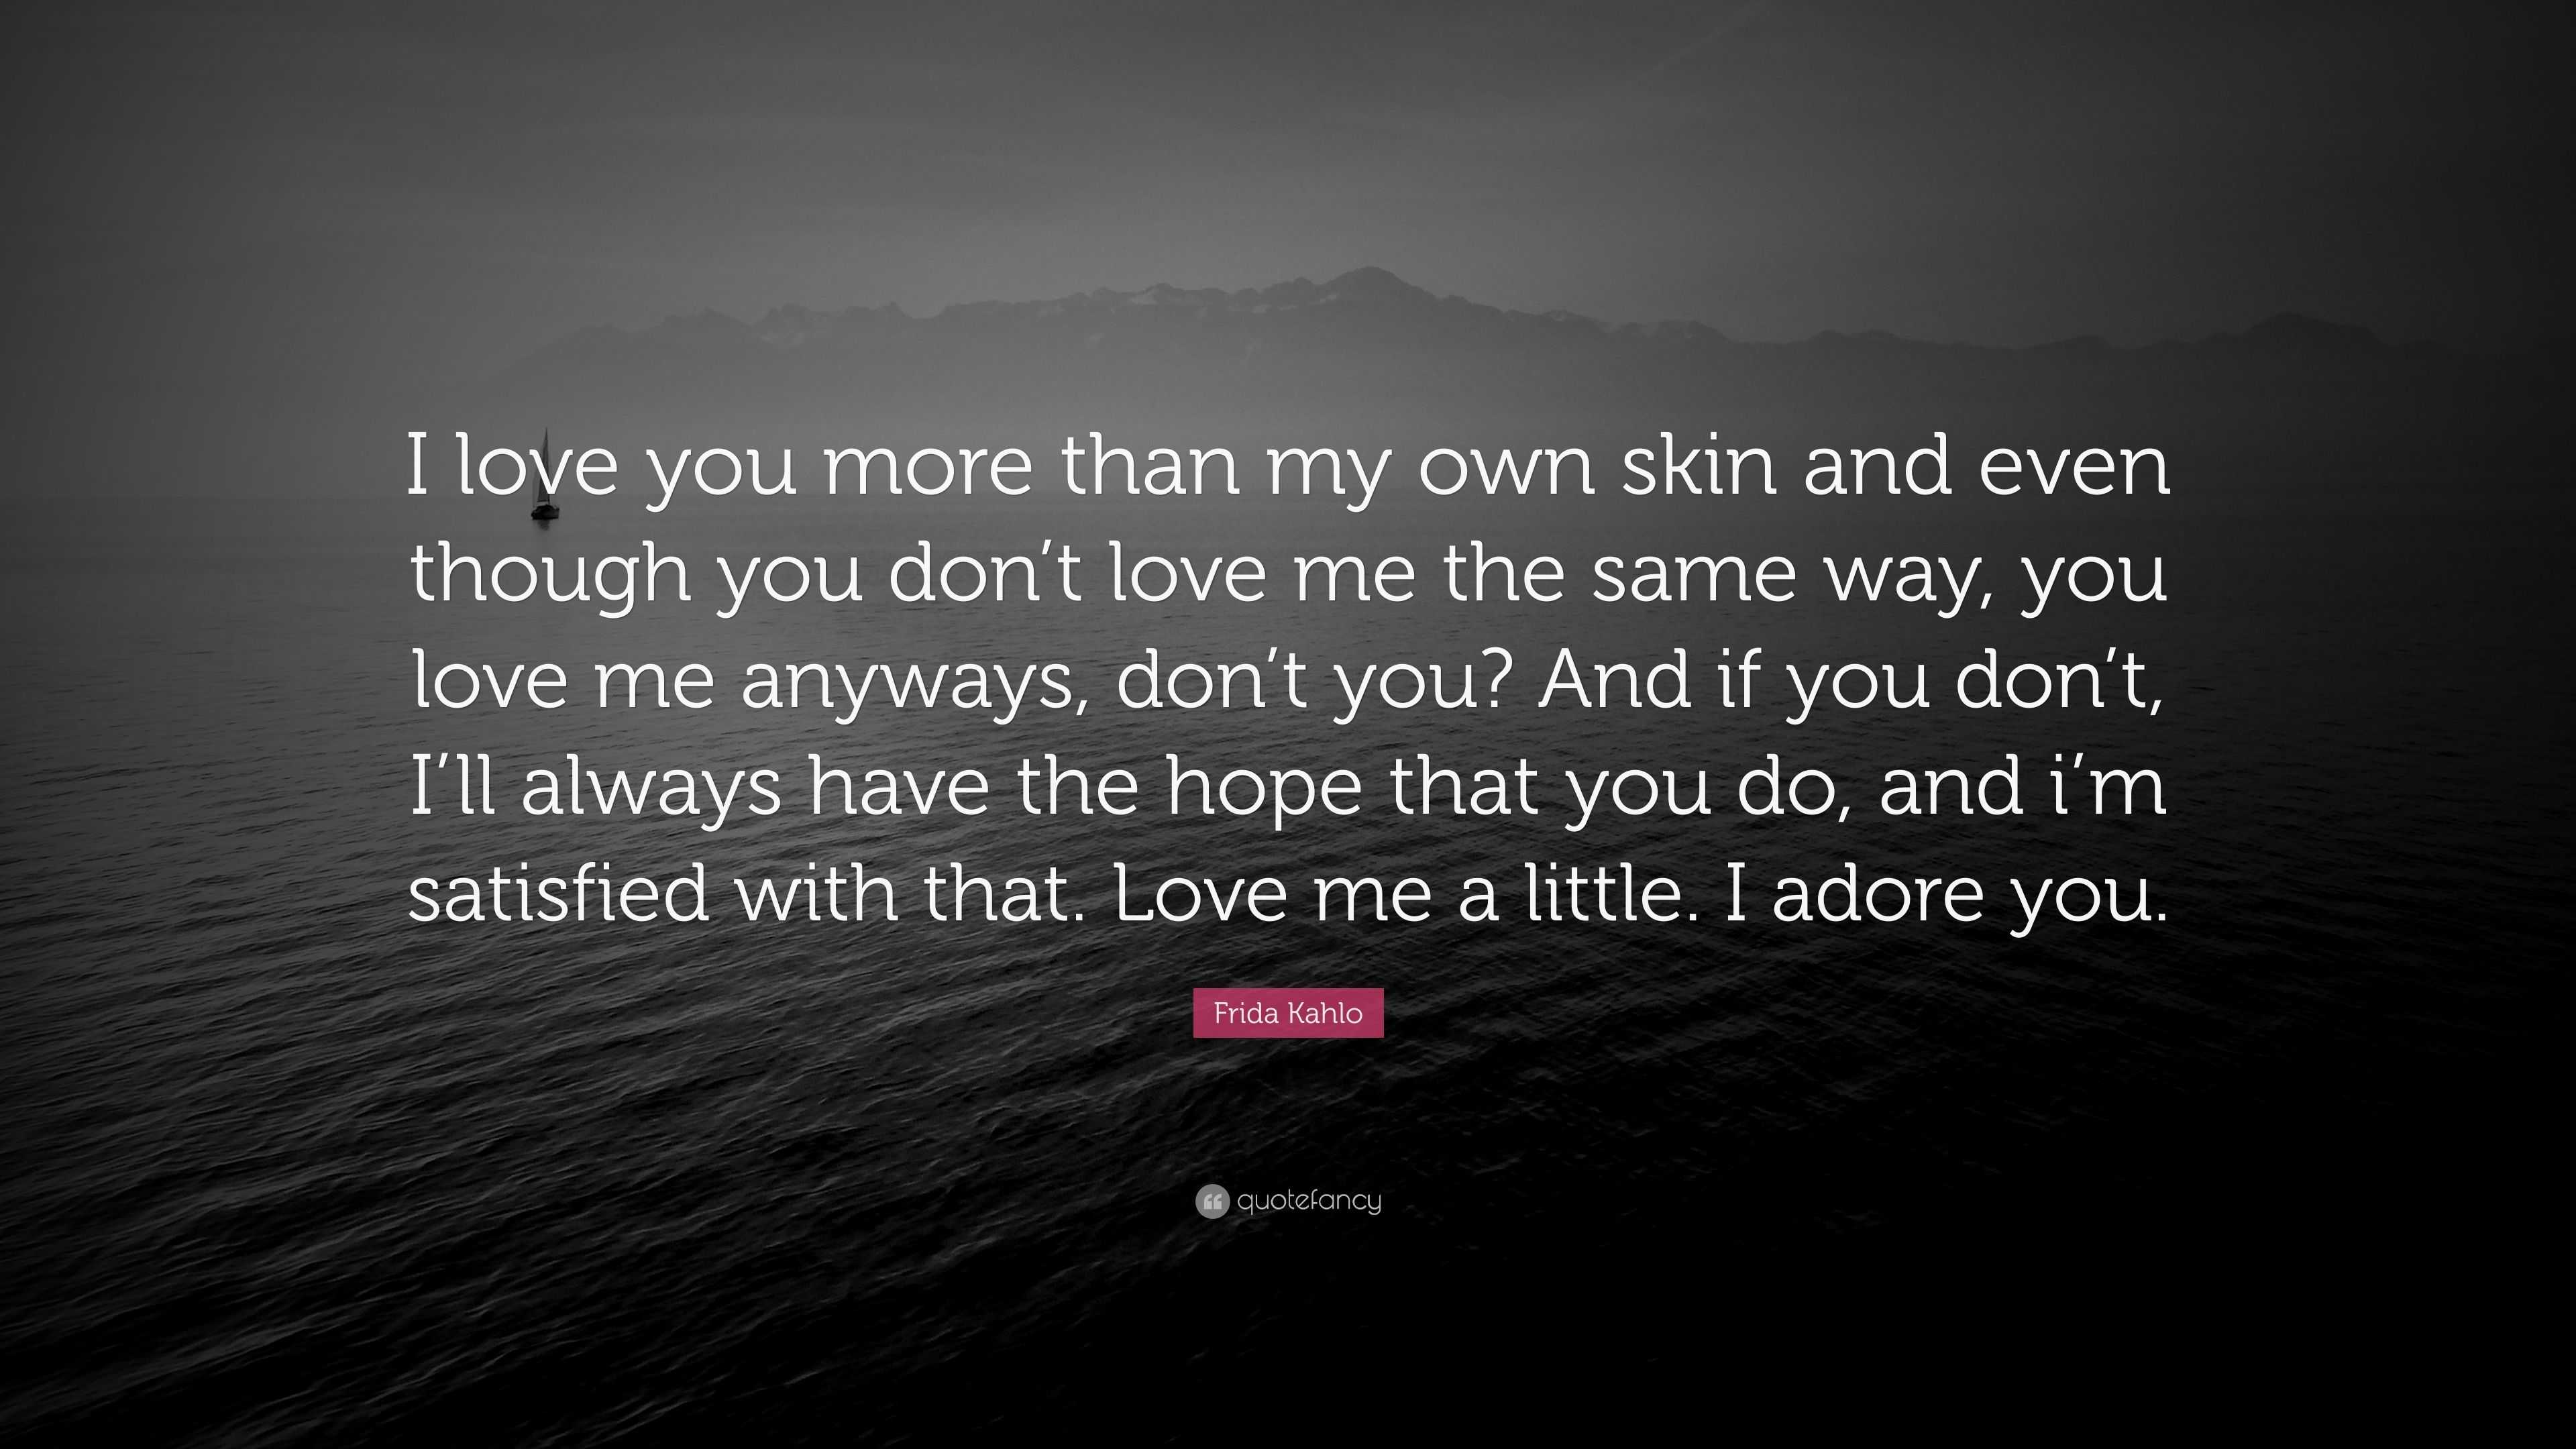 Frida Kahlo Quote I Love You More Than My Own Skin And Even Though You Don T Love Me The Same Way You Love Me Anyways Don T You And If 12 Wallpapers